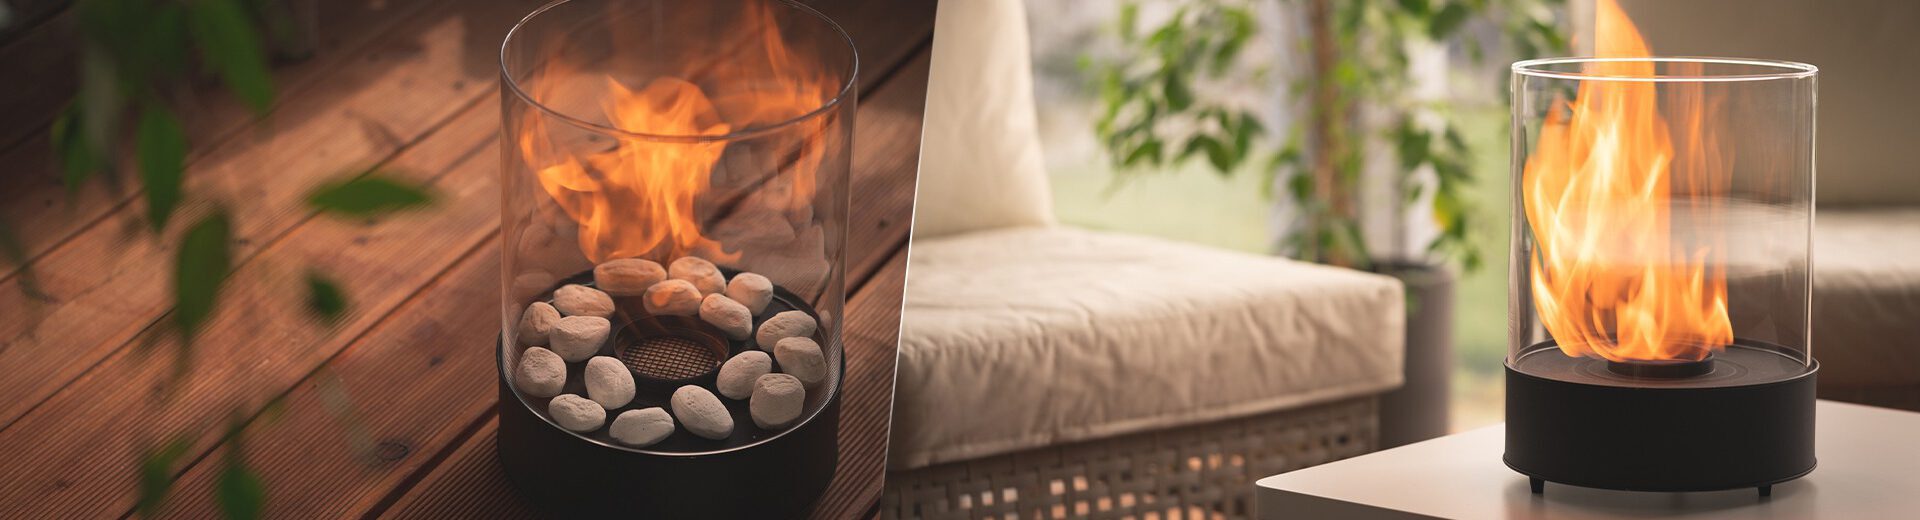 Ceramic Stone-like Pebbles For Gas Ethanol Fireplace,Stove,Fire Pits,many colors 